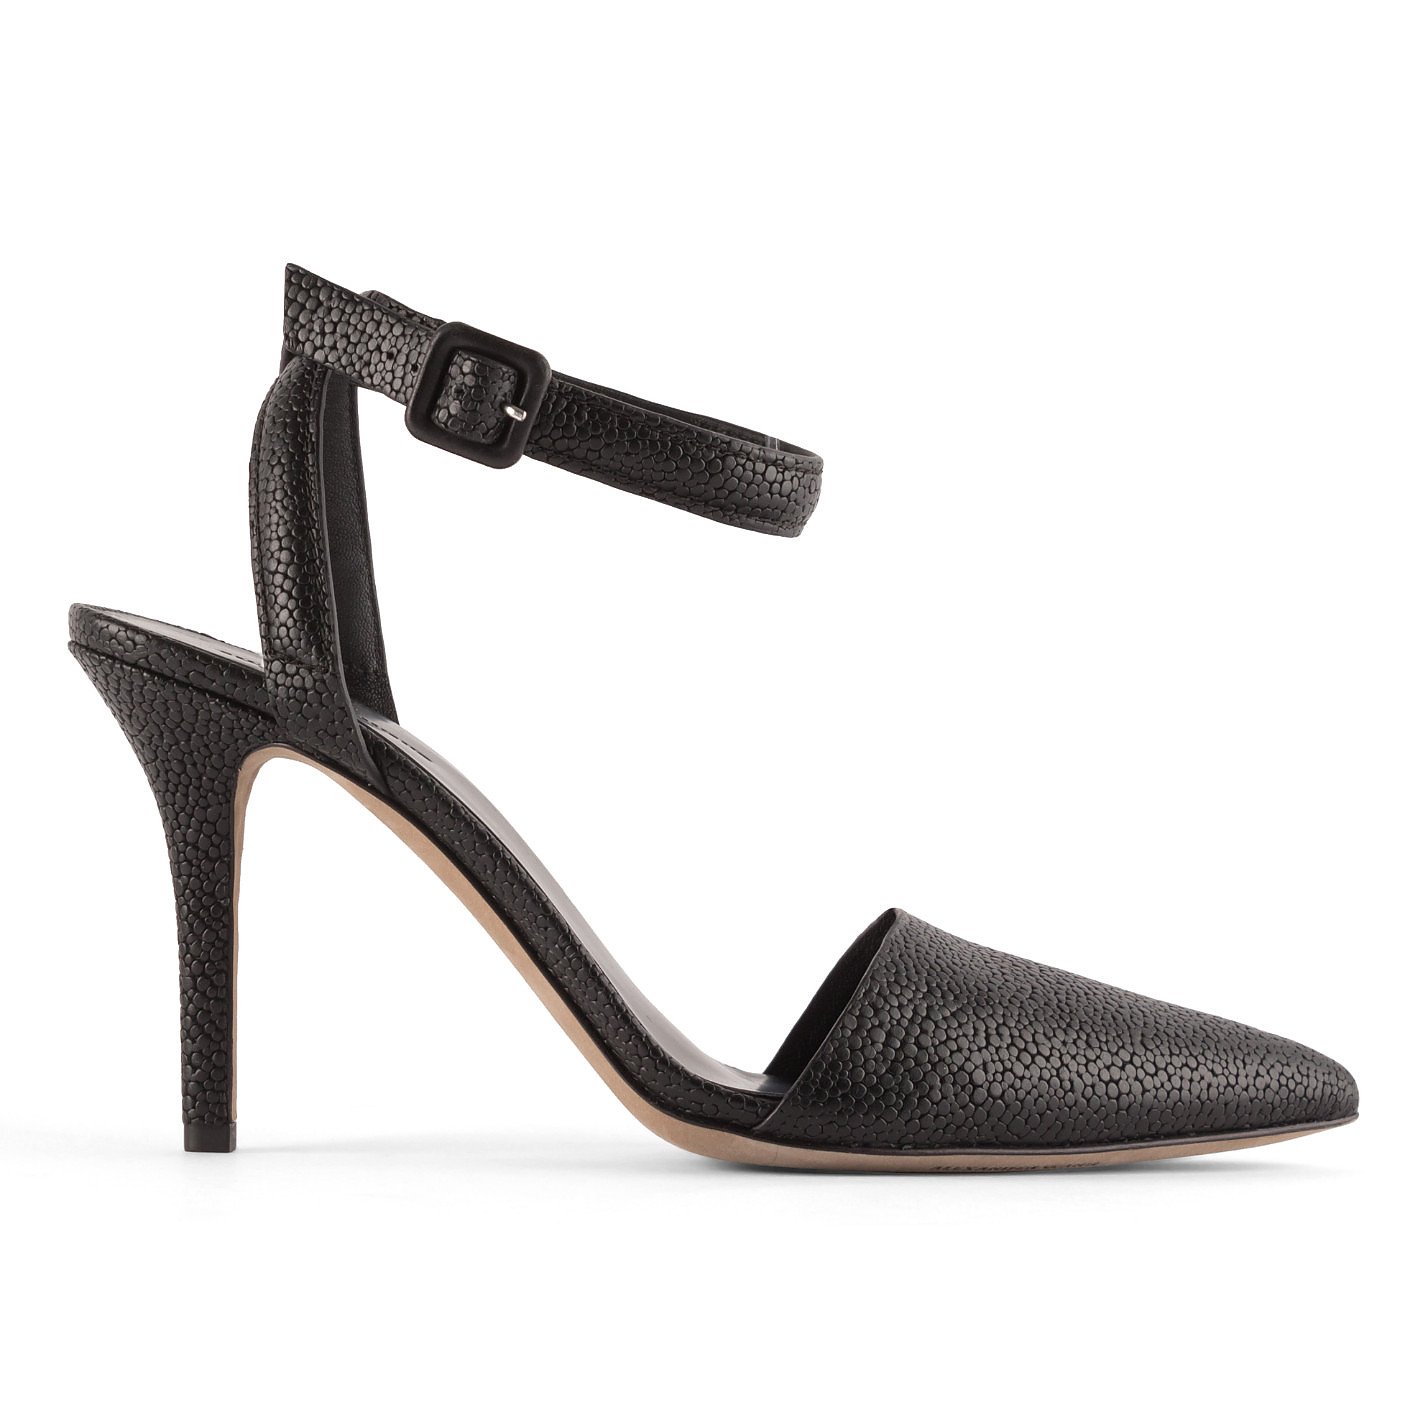 or Buy Alexander Wang Lovisa Textured Leather Pumps from MyWardrobeHQ.com